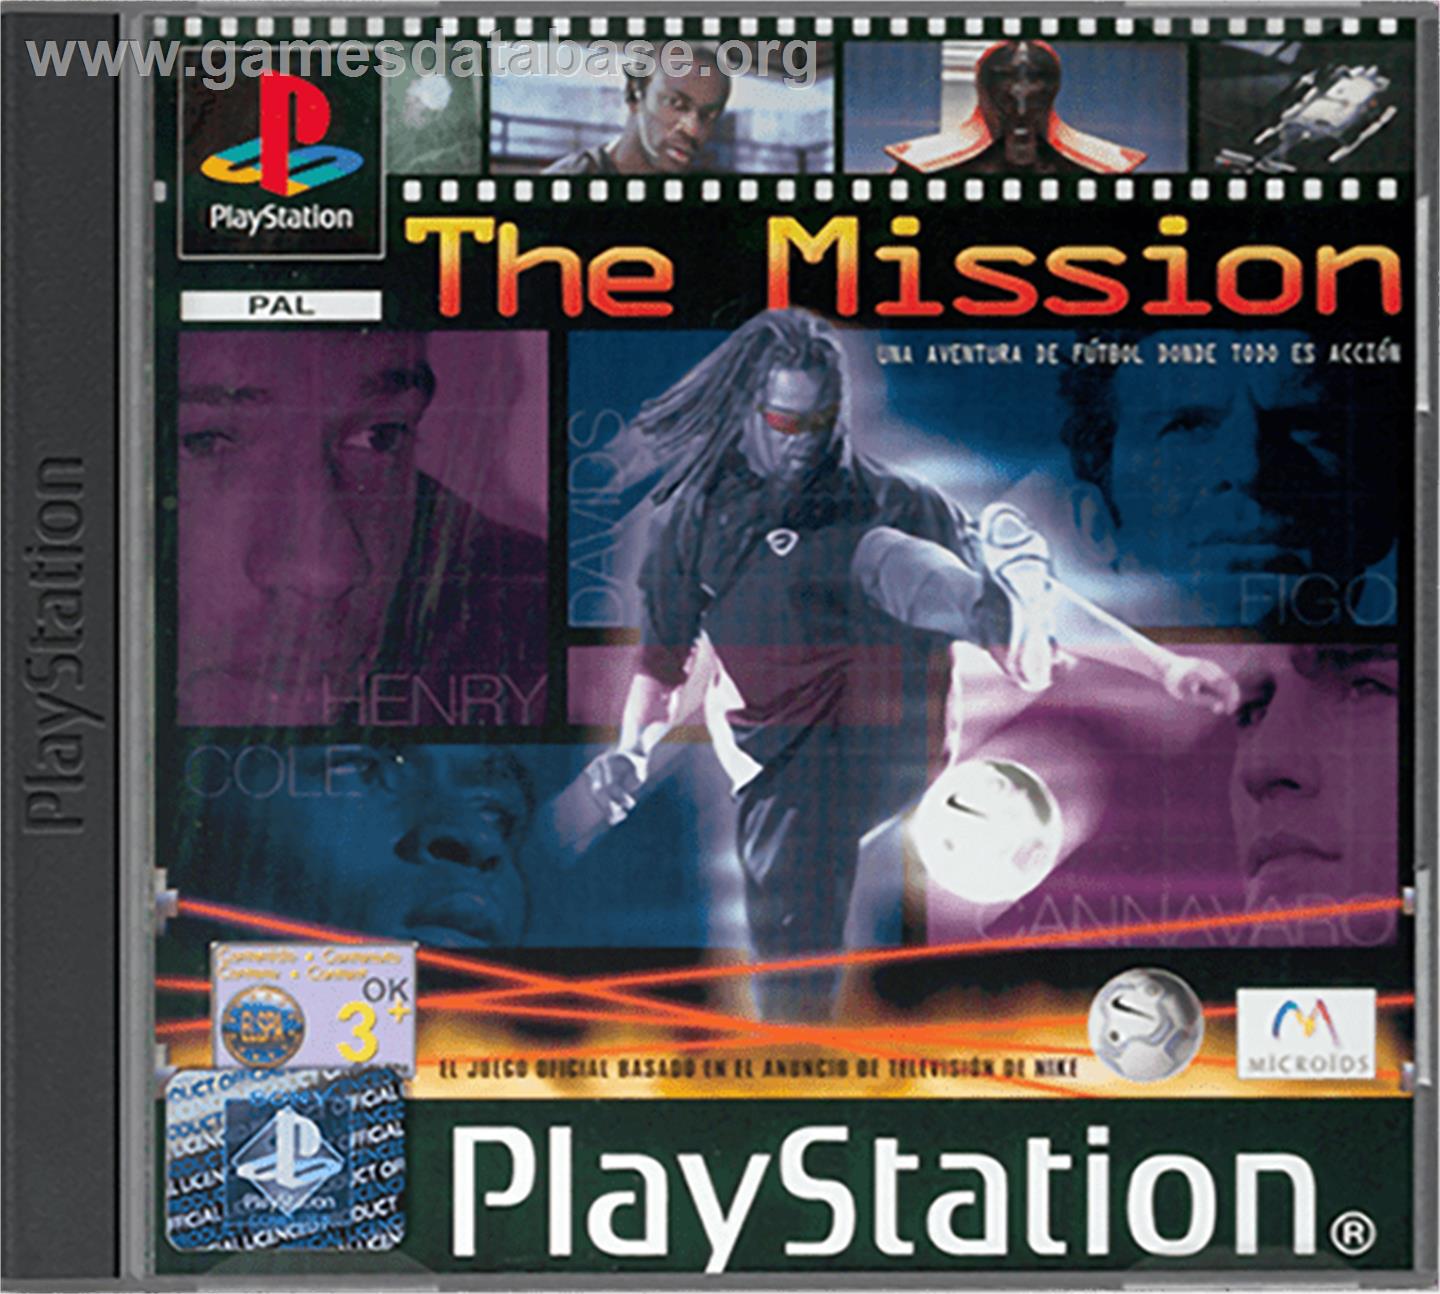 The Mission - Sony Playstation - Artwork - Box